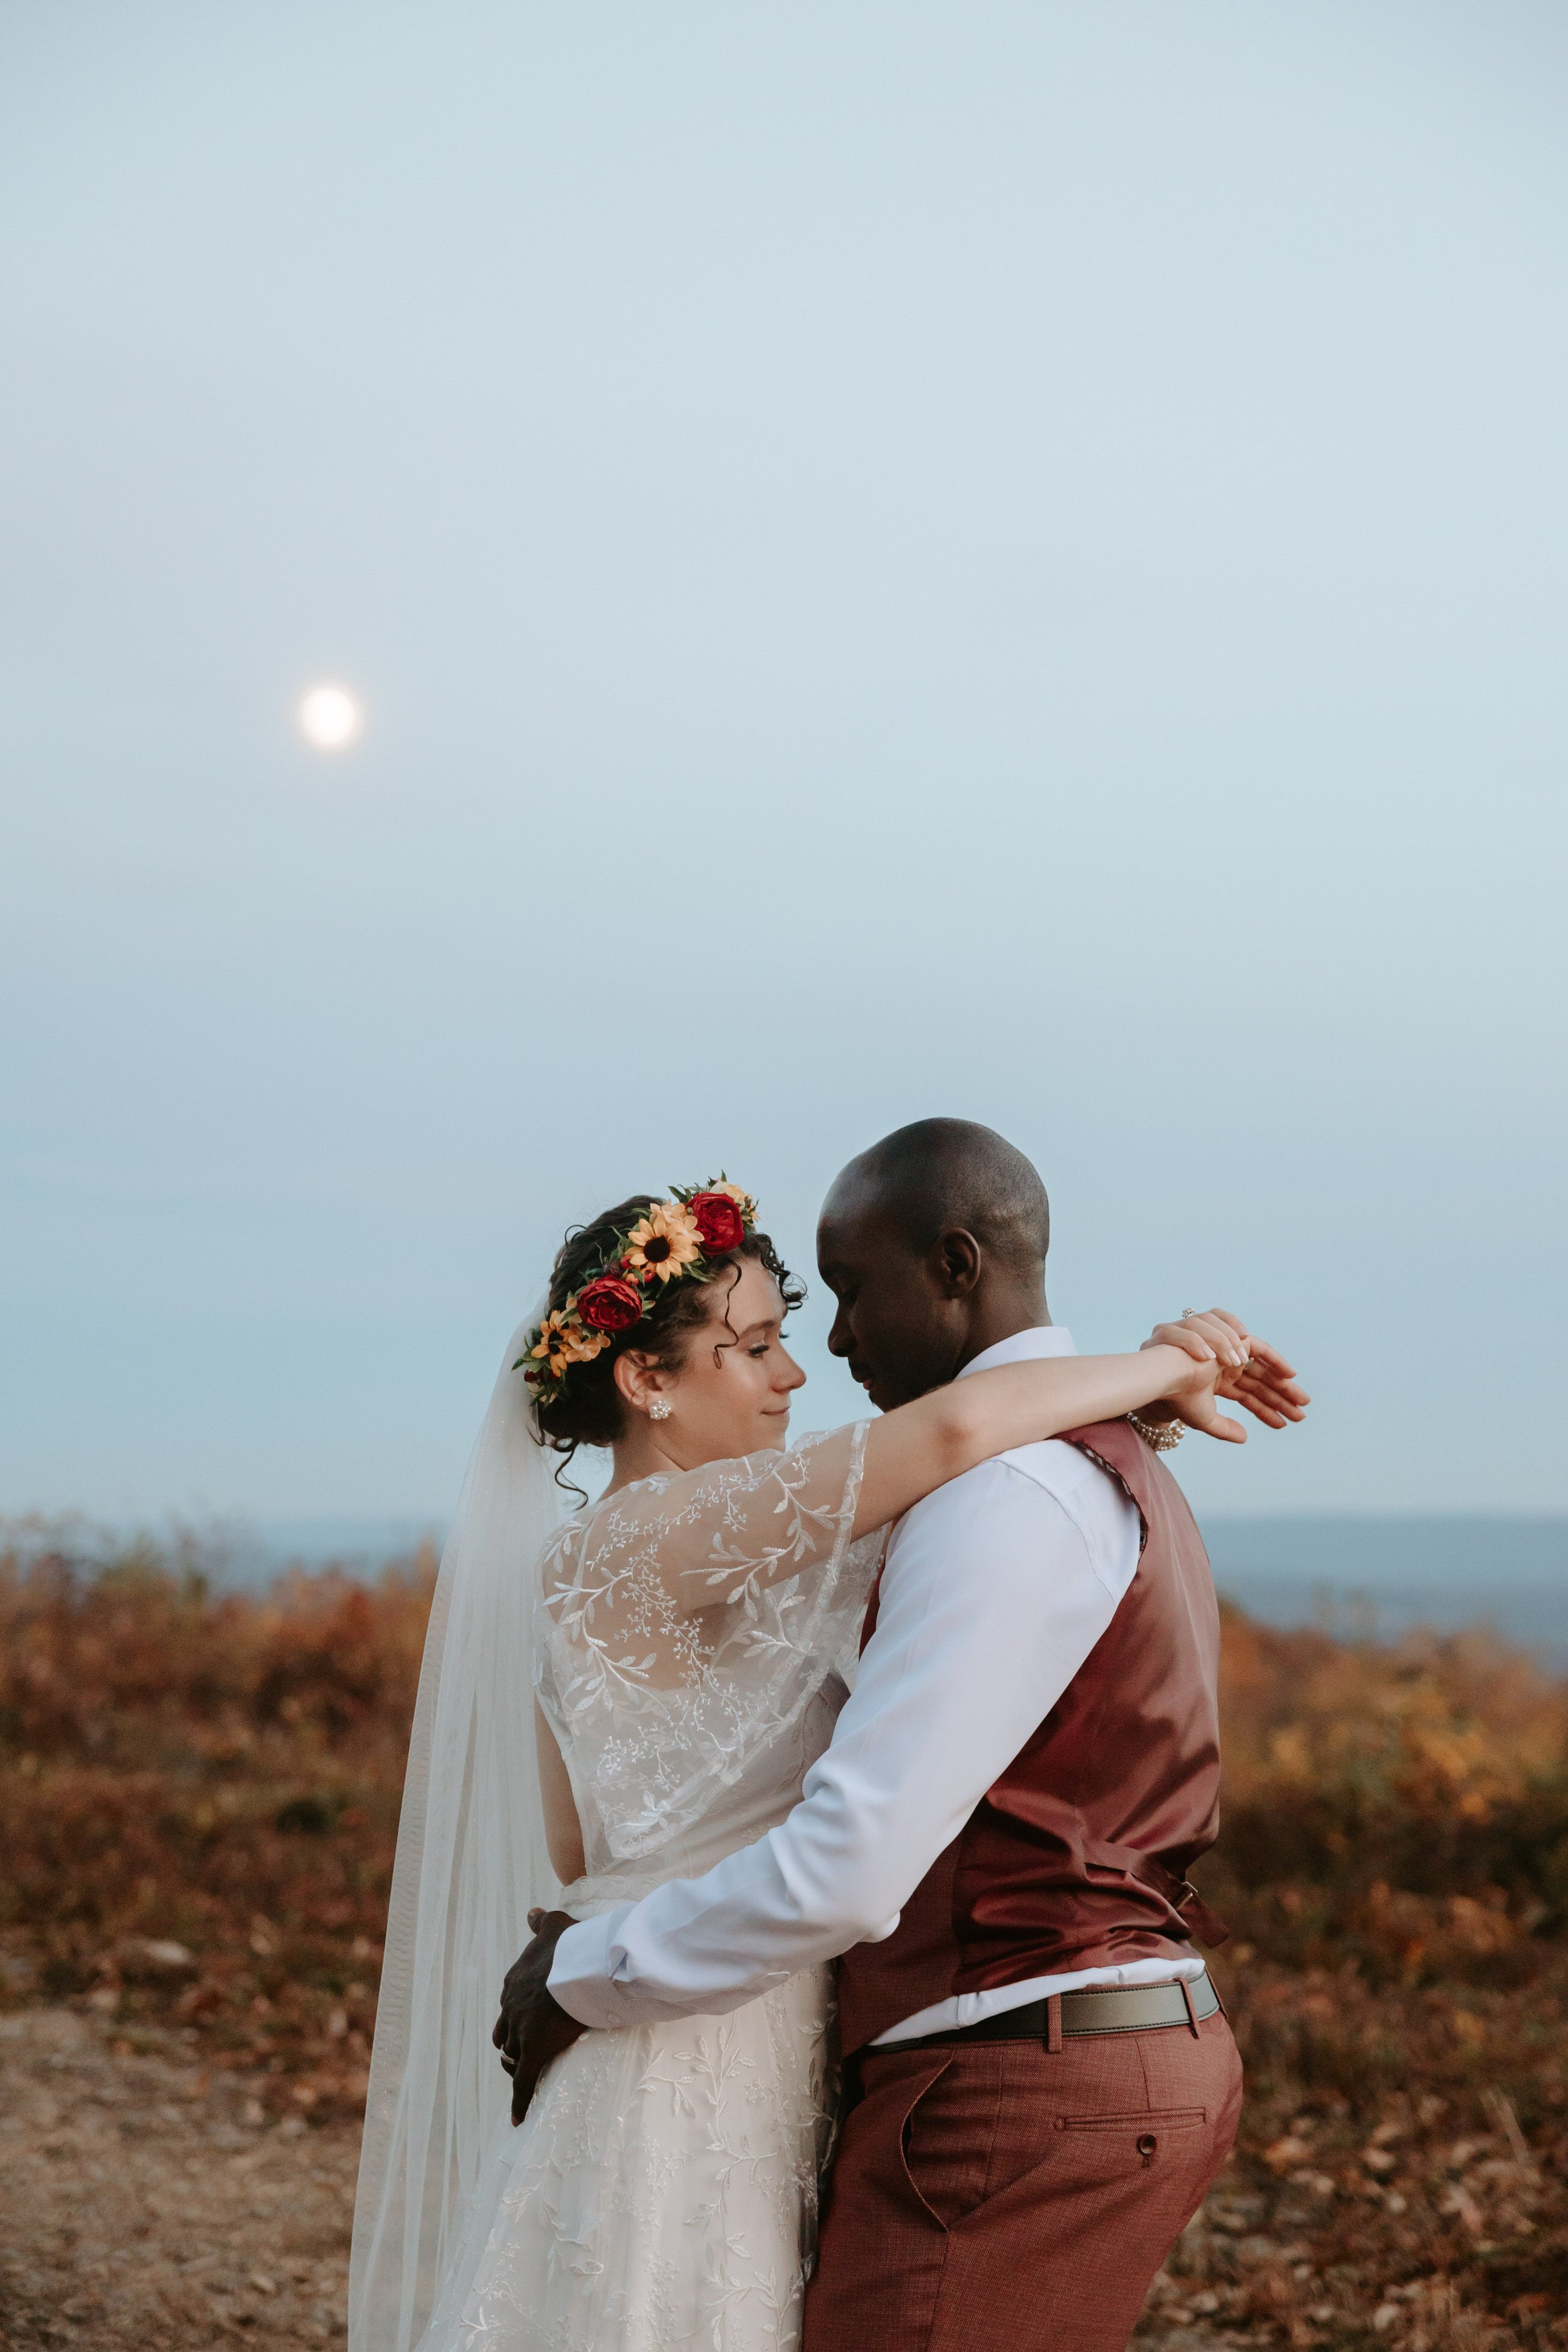 A bride and groom embrace in front of a full moon.